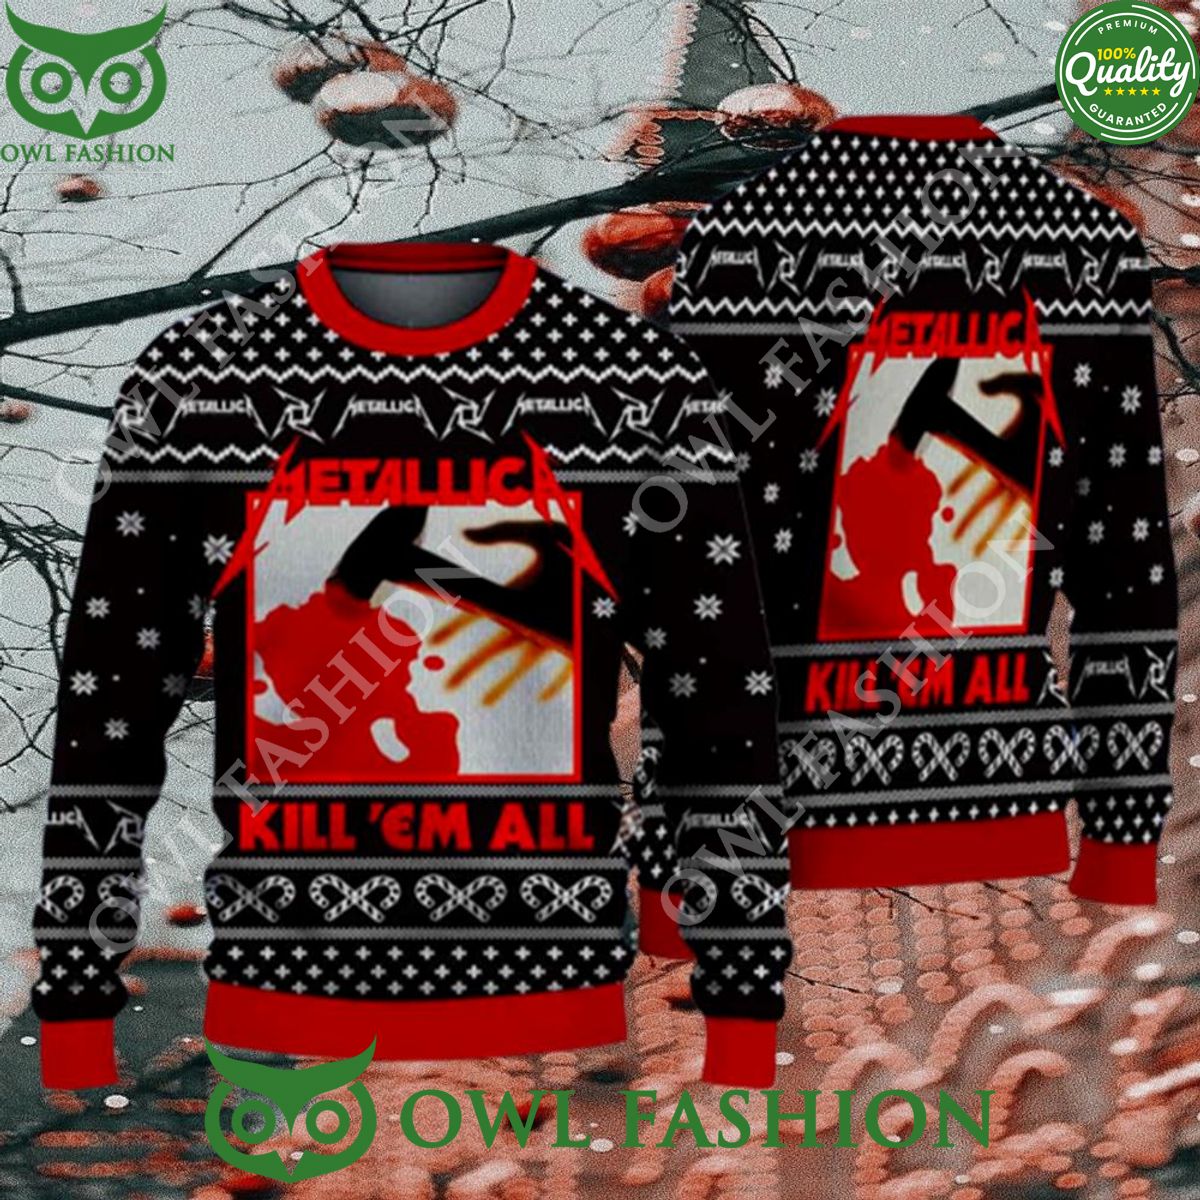 Metallica Kill ‘Em Album All Snowflakes And Candy Cane Christmas Sweater Jumper